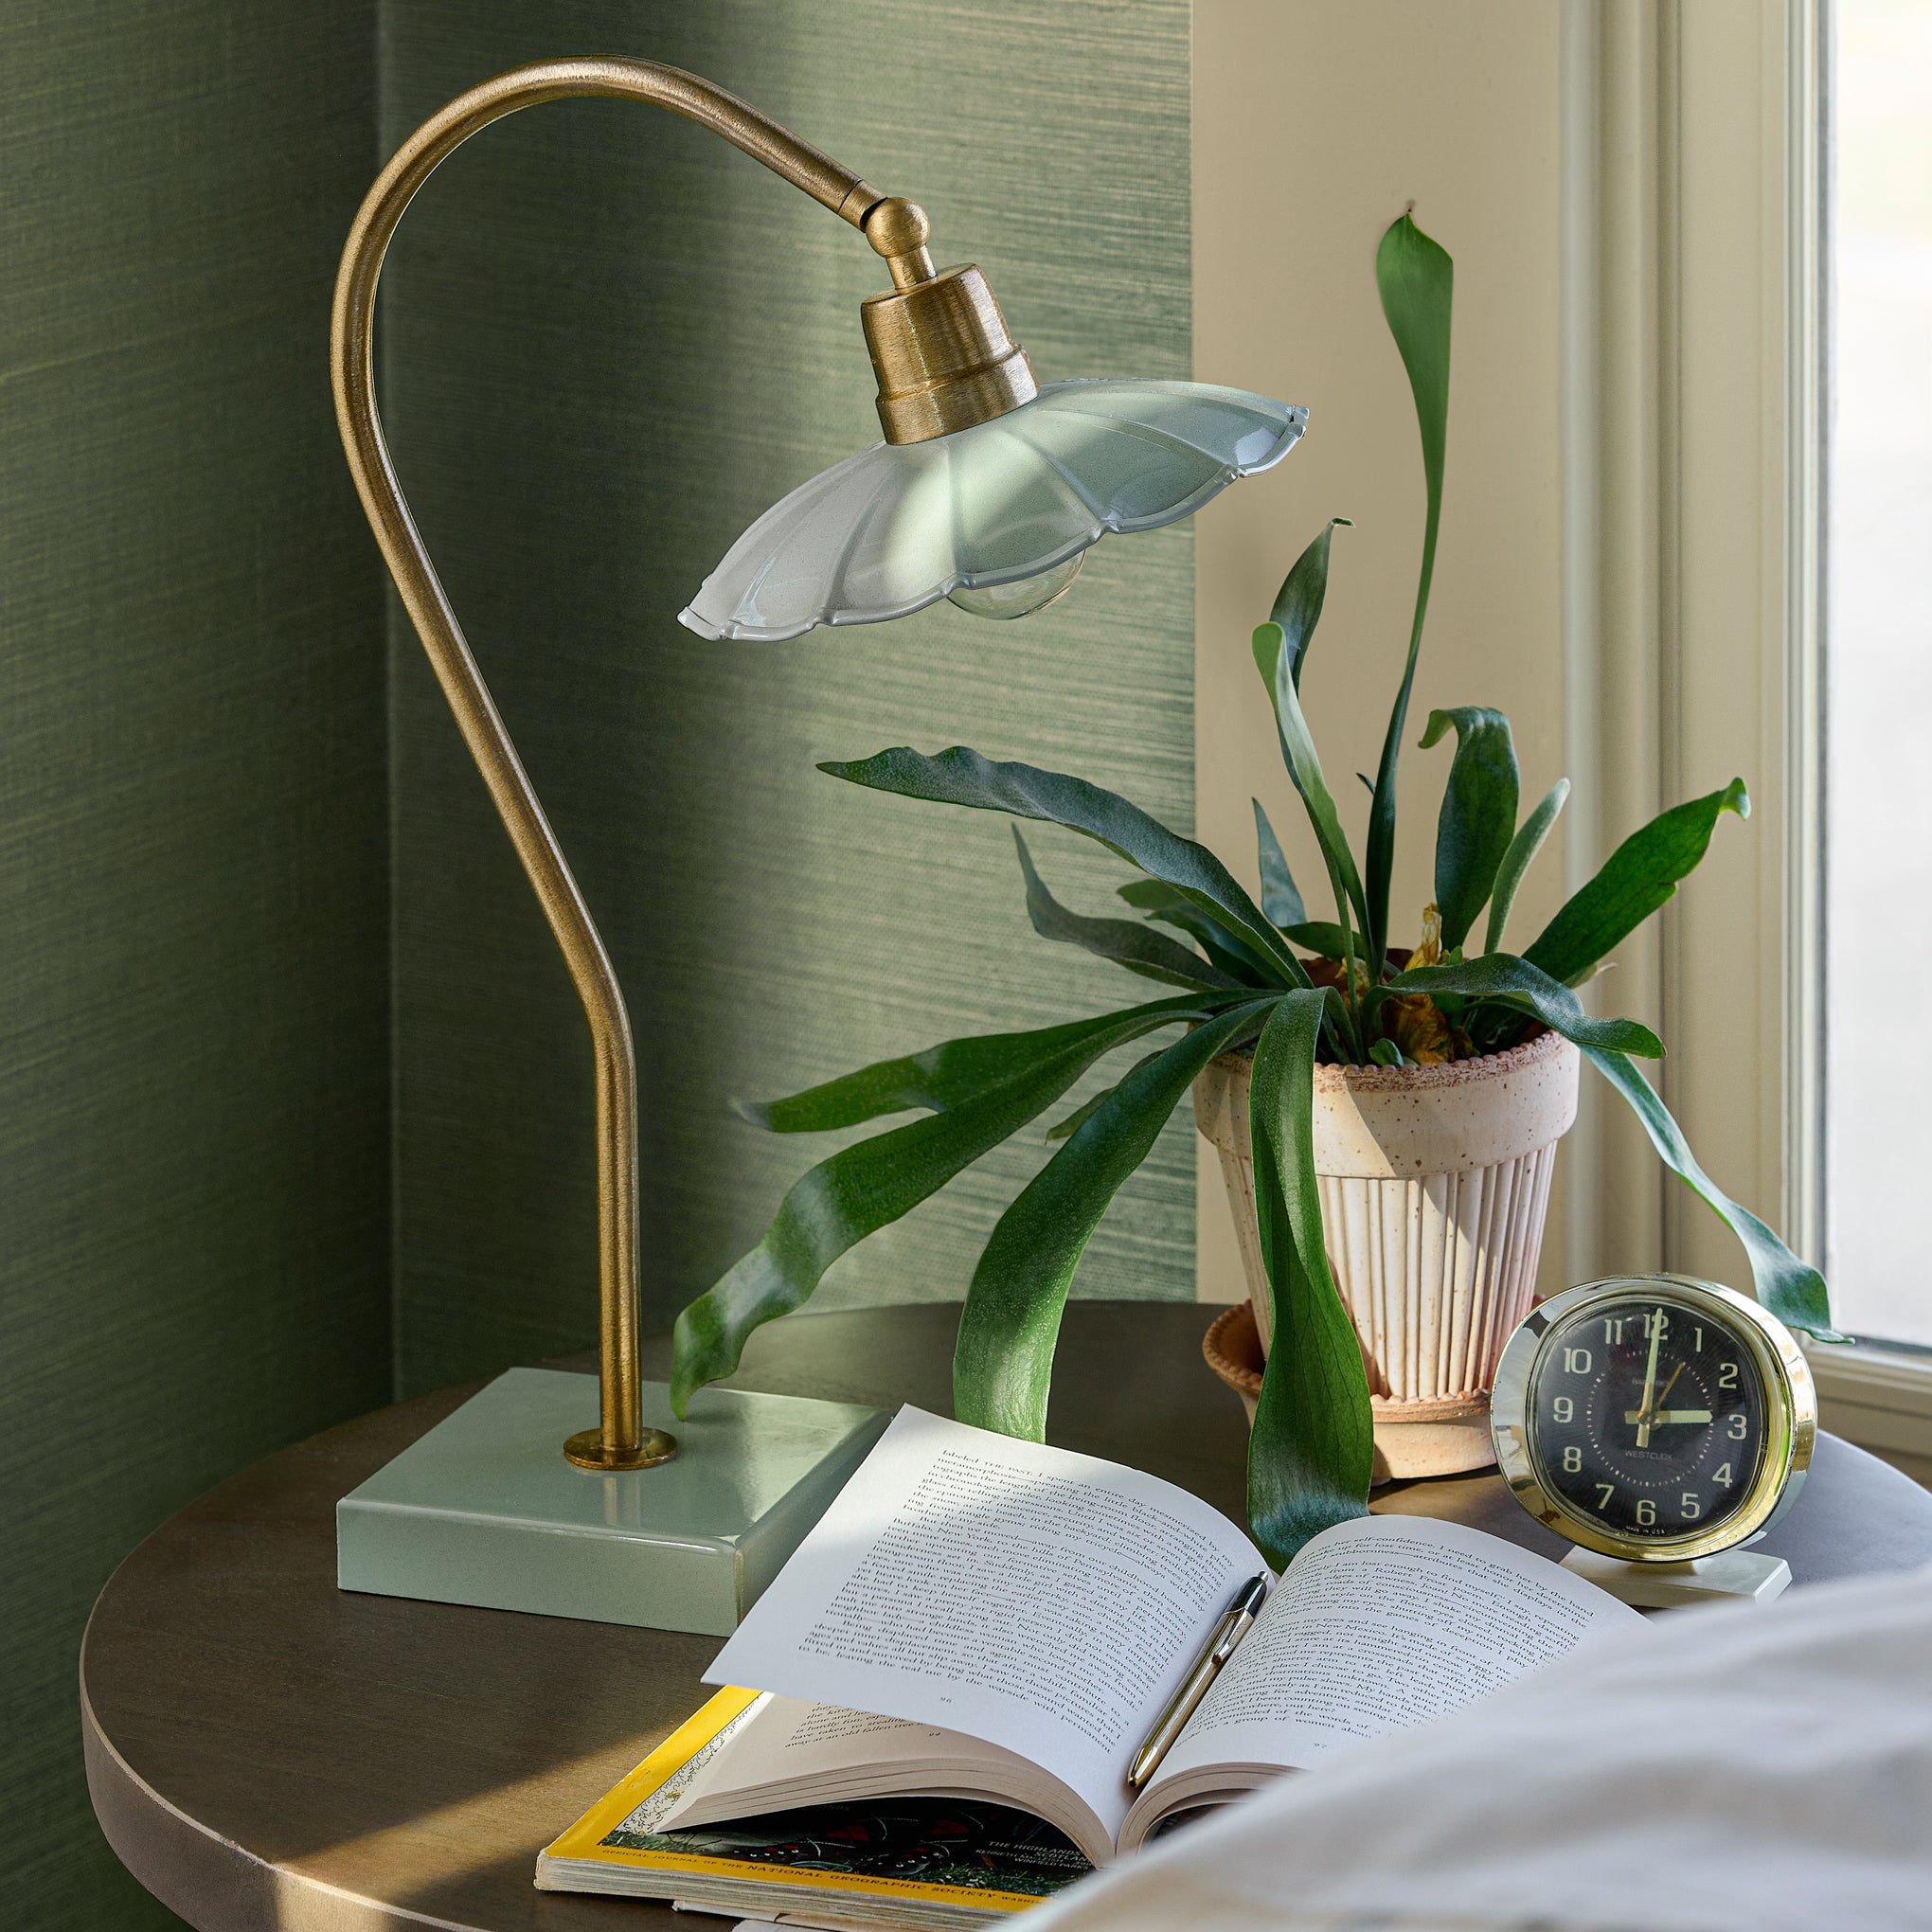 Lamp in seafoam on a nightstand with a plant $128.00